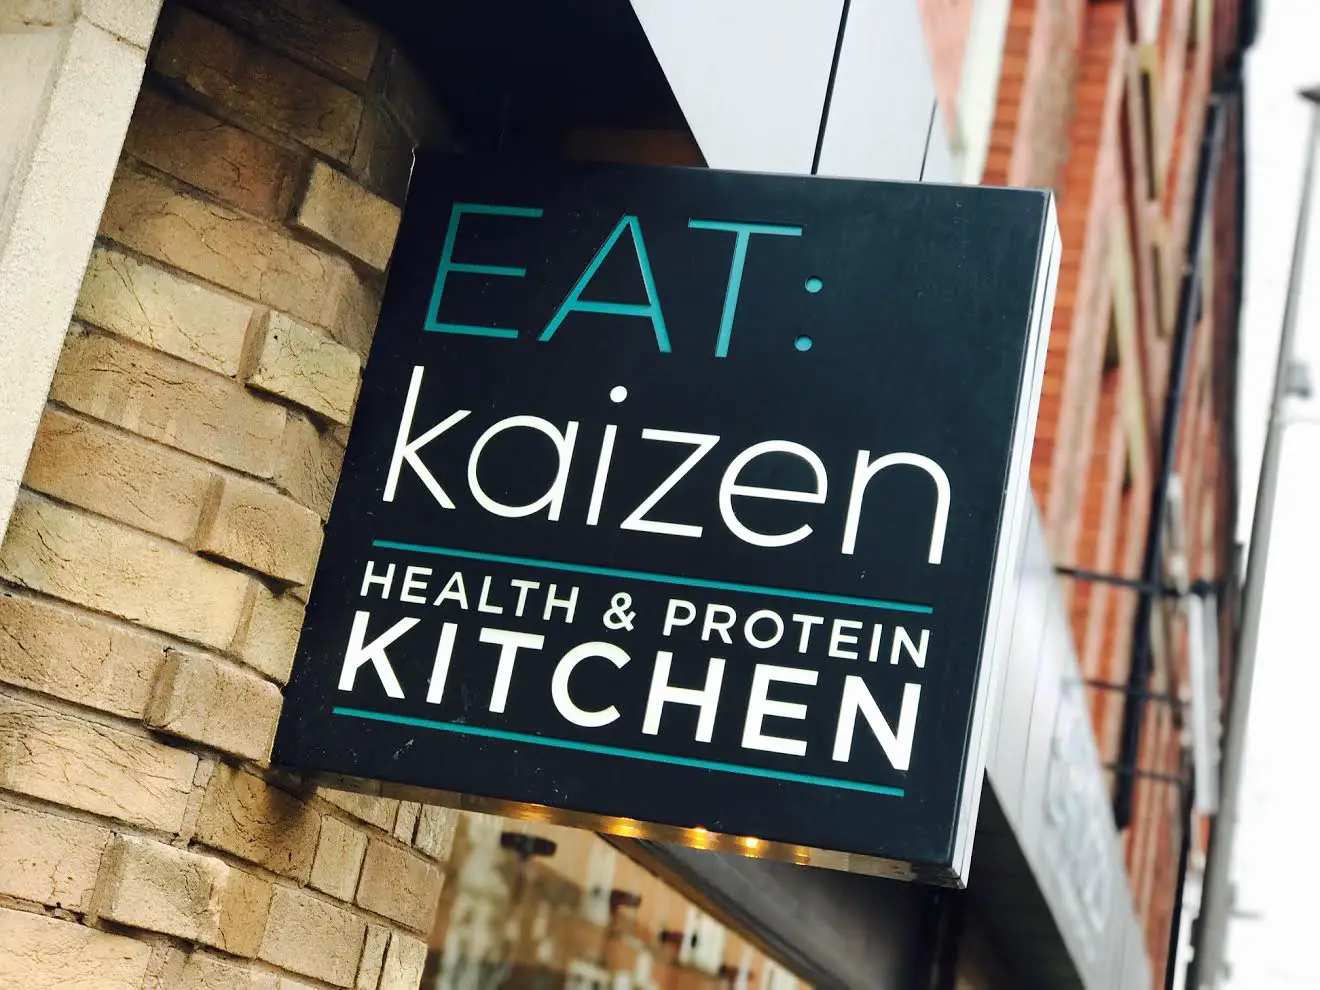 EAT:kaizen is opening in the former Yorkshire Bank unit on Stamford New Road